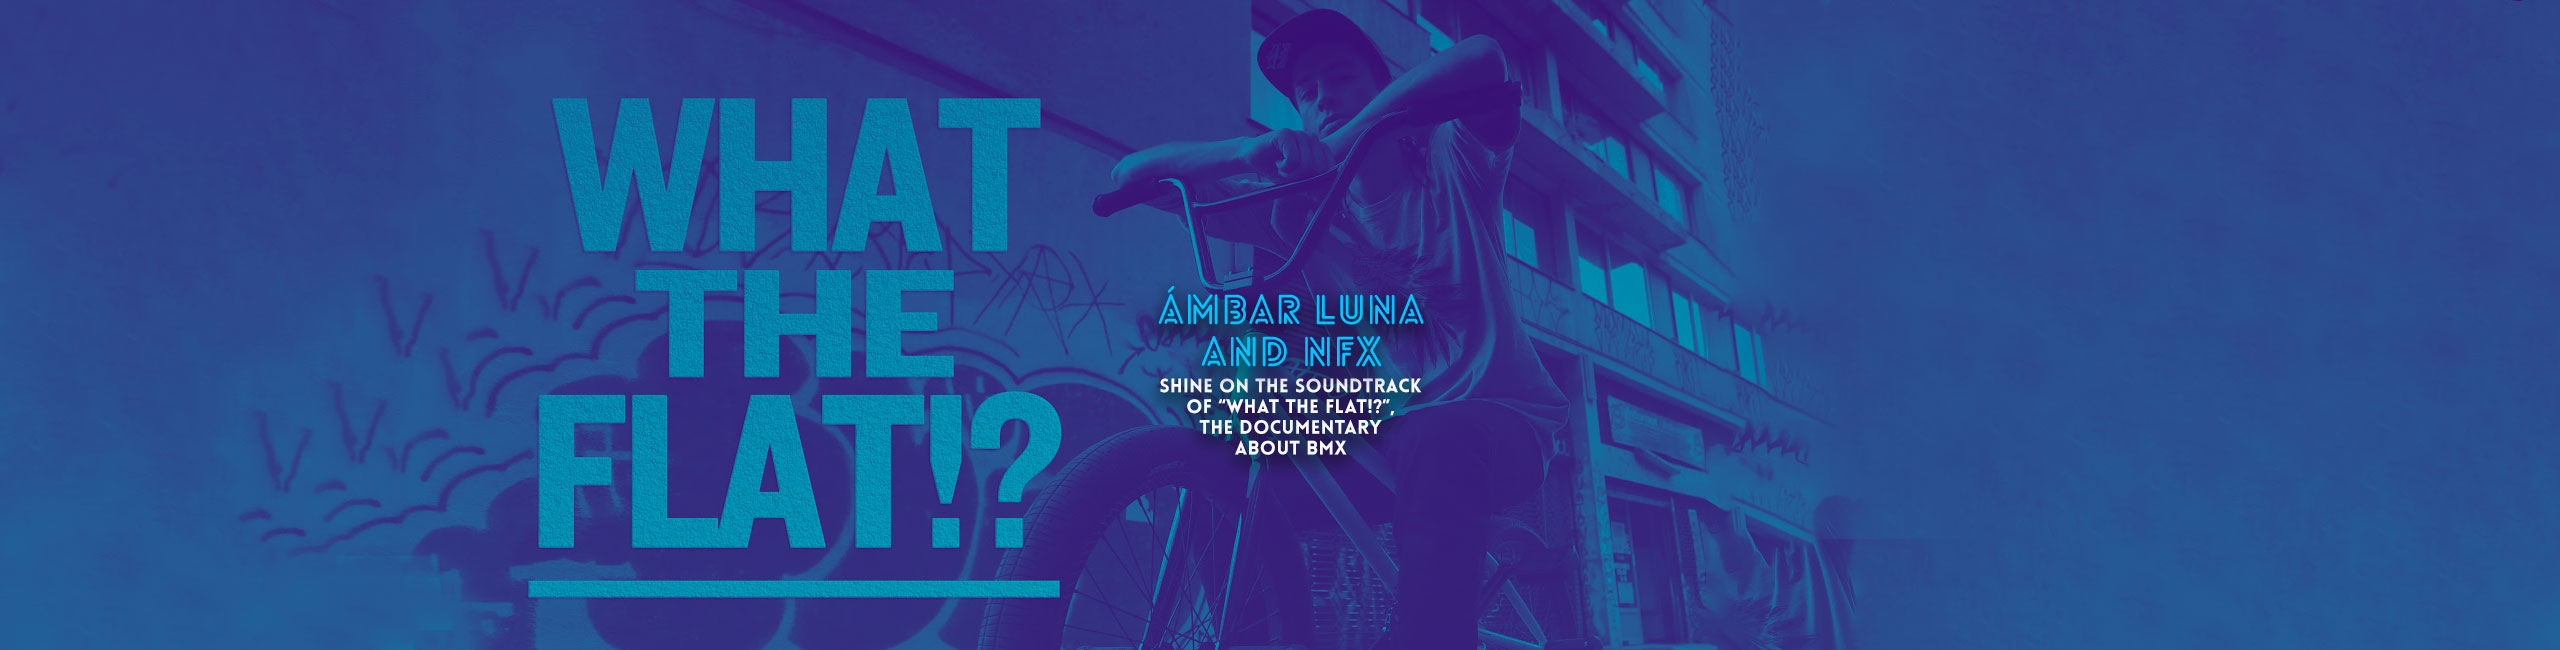 ÁMBAR LUNA AND NFX SHINE ON THE SOUNDTRACK OF “WHAT THE FLAT!?”, ﻿THE DOCUMENTARY ABOUT BMX